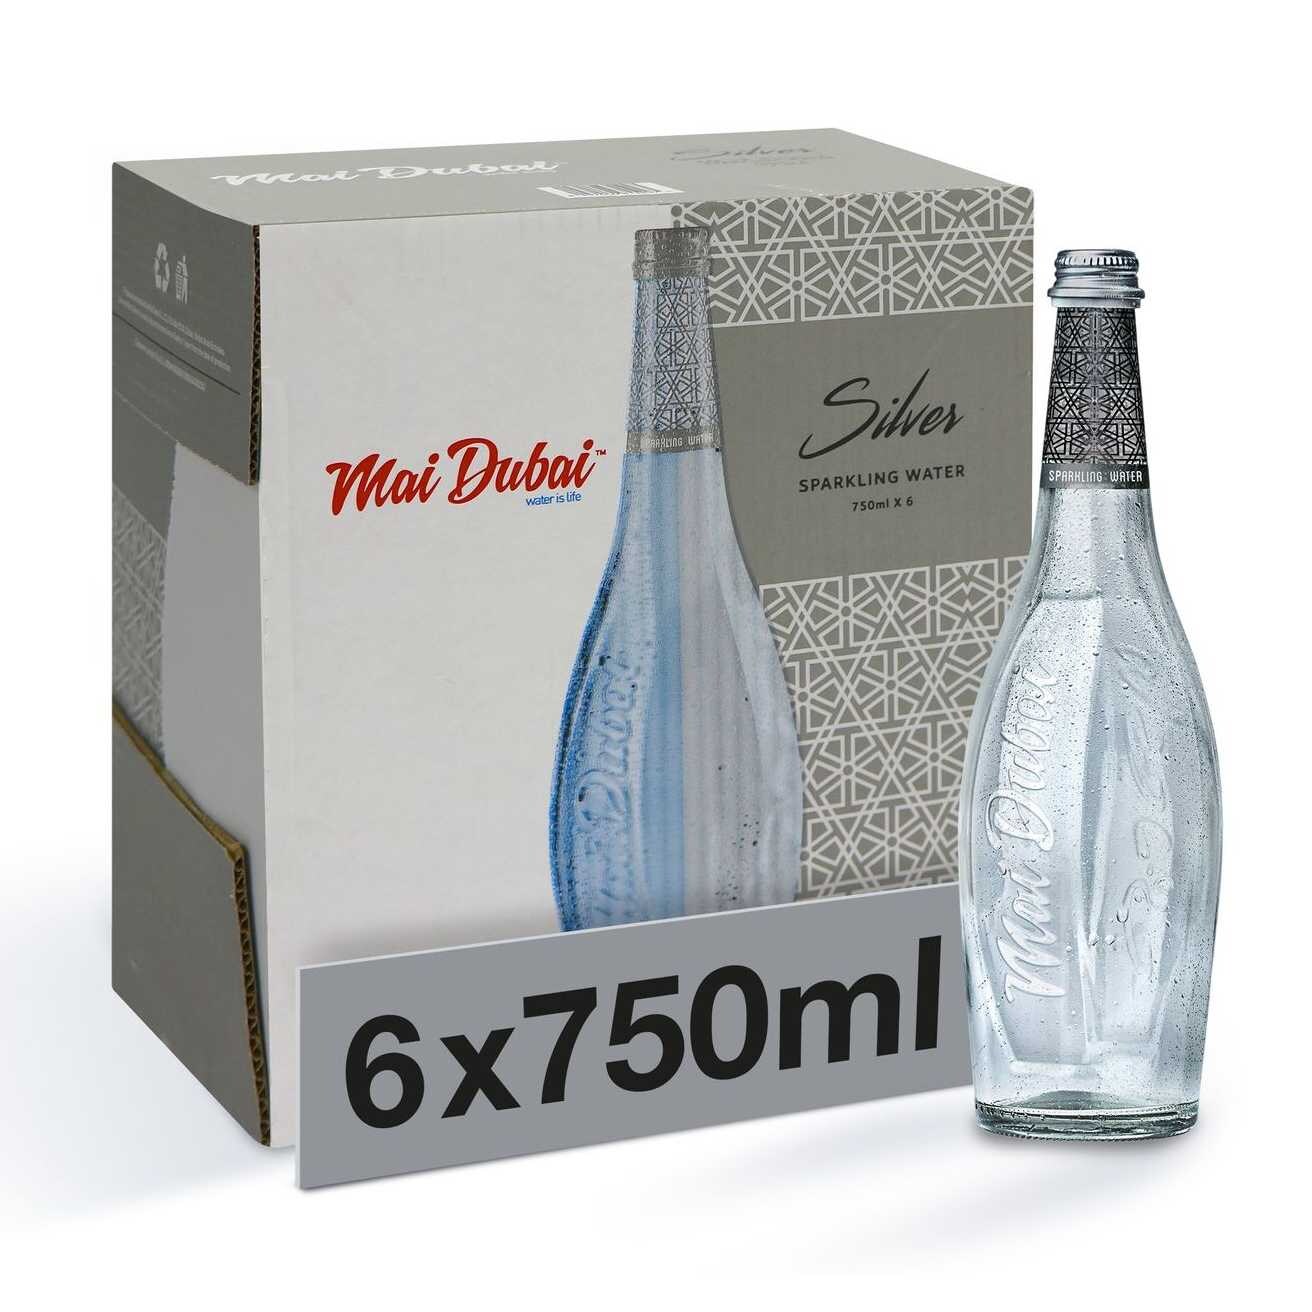 Mai Dubai Sparkling Water in Glass Bottle, 750ml, Box of 6 Pieces